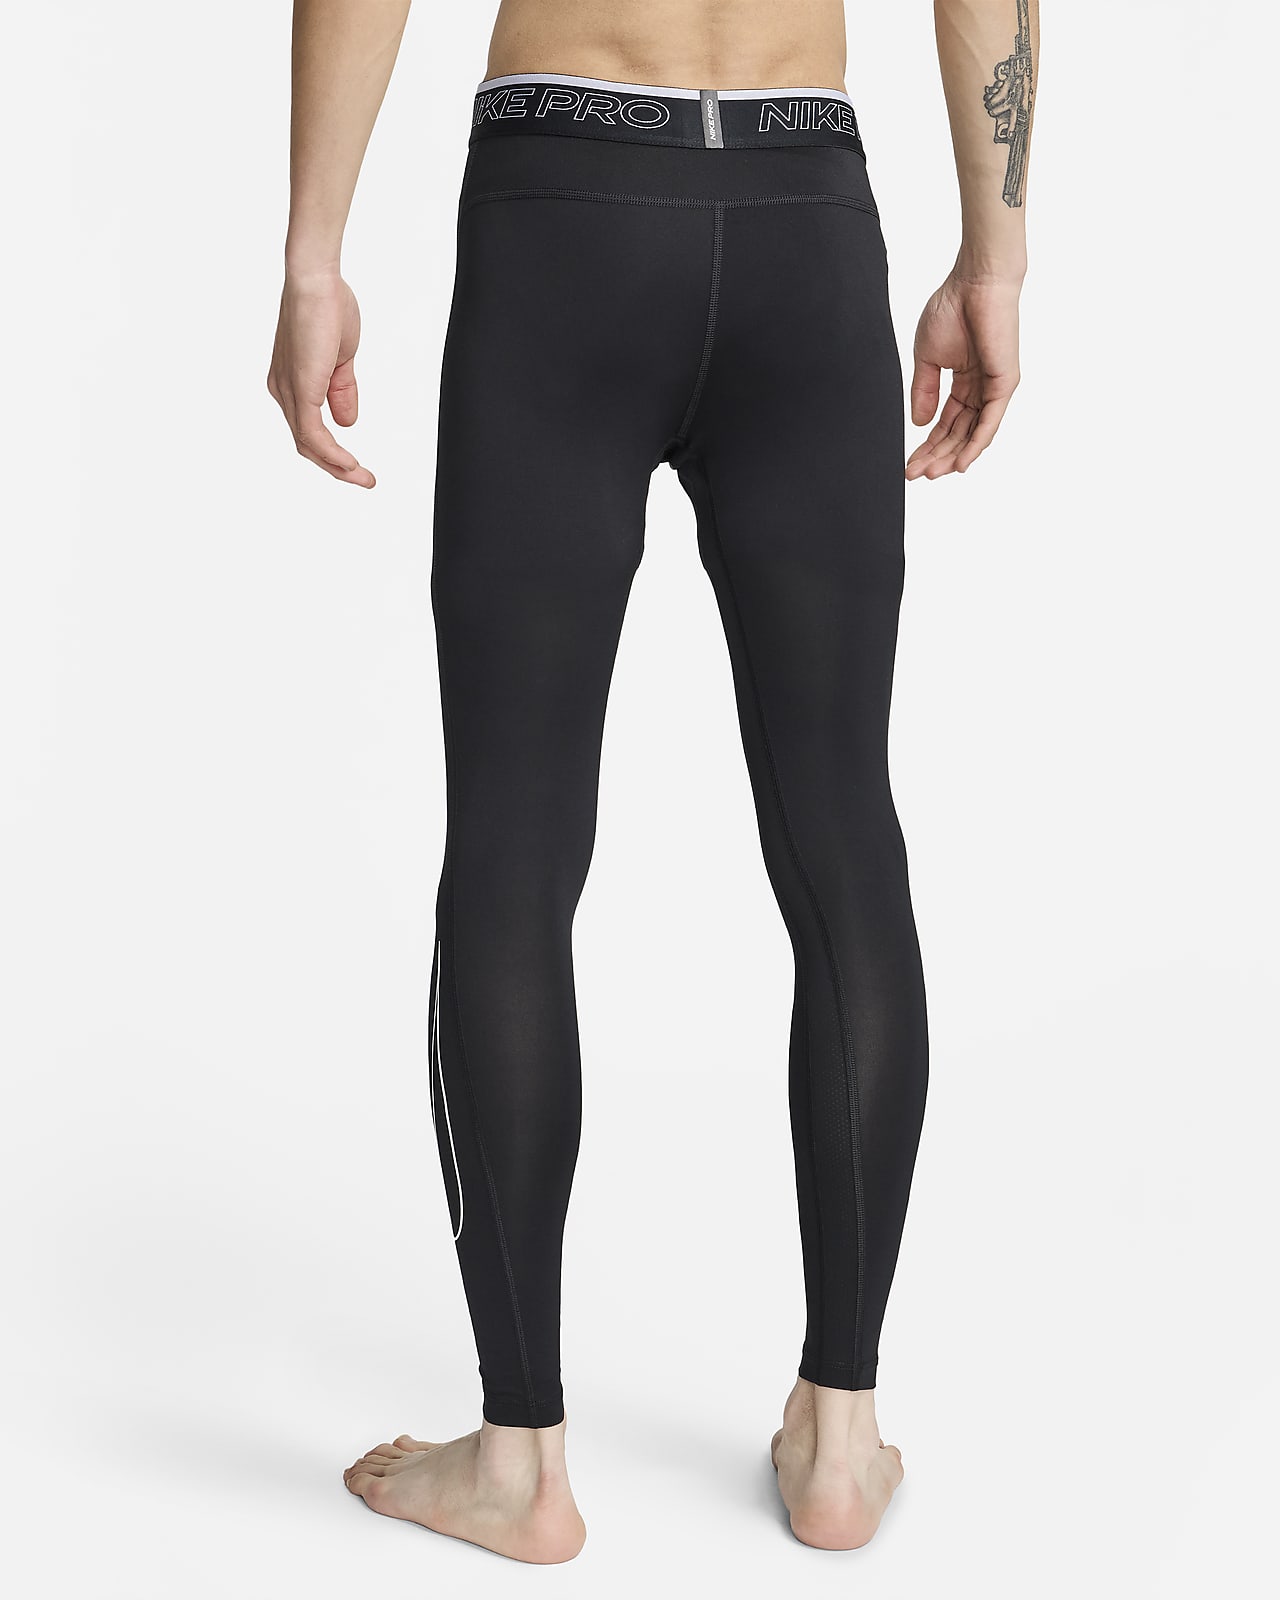 Compression tights for men & women